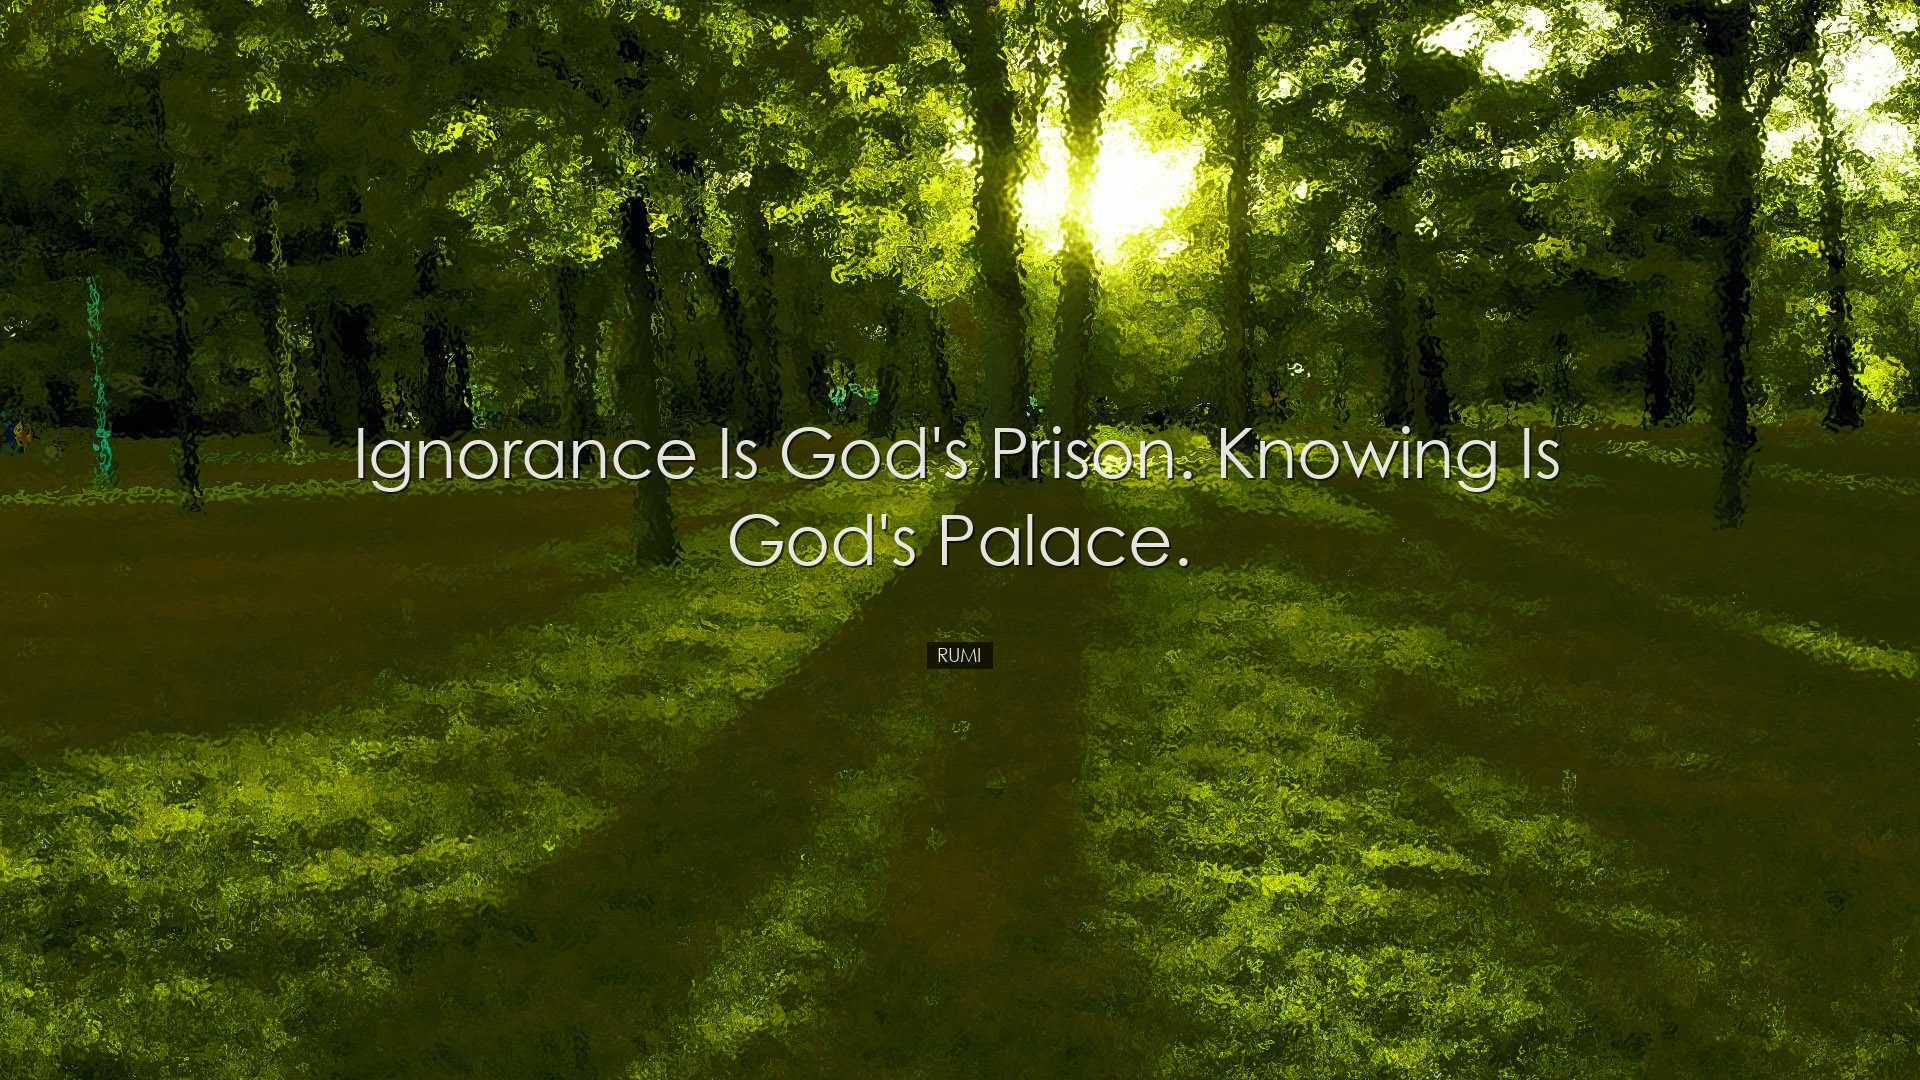 Ignorance is God's prison. Knowing is God's palace. - Rumi